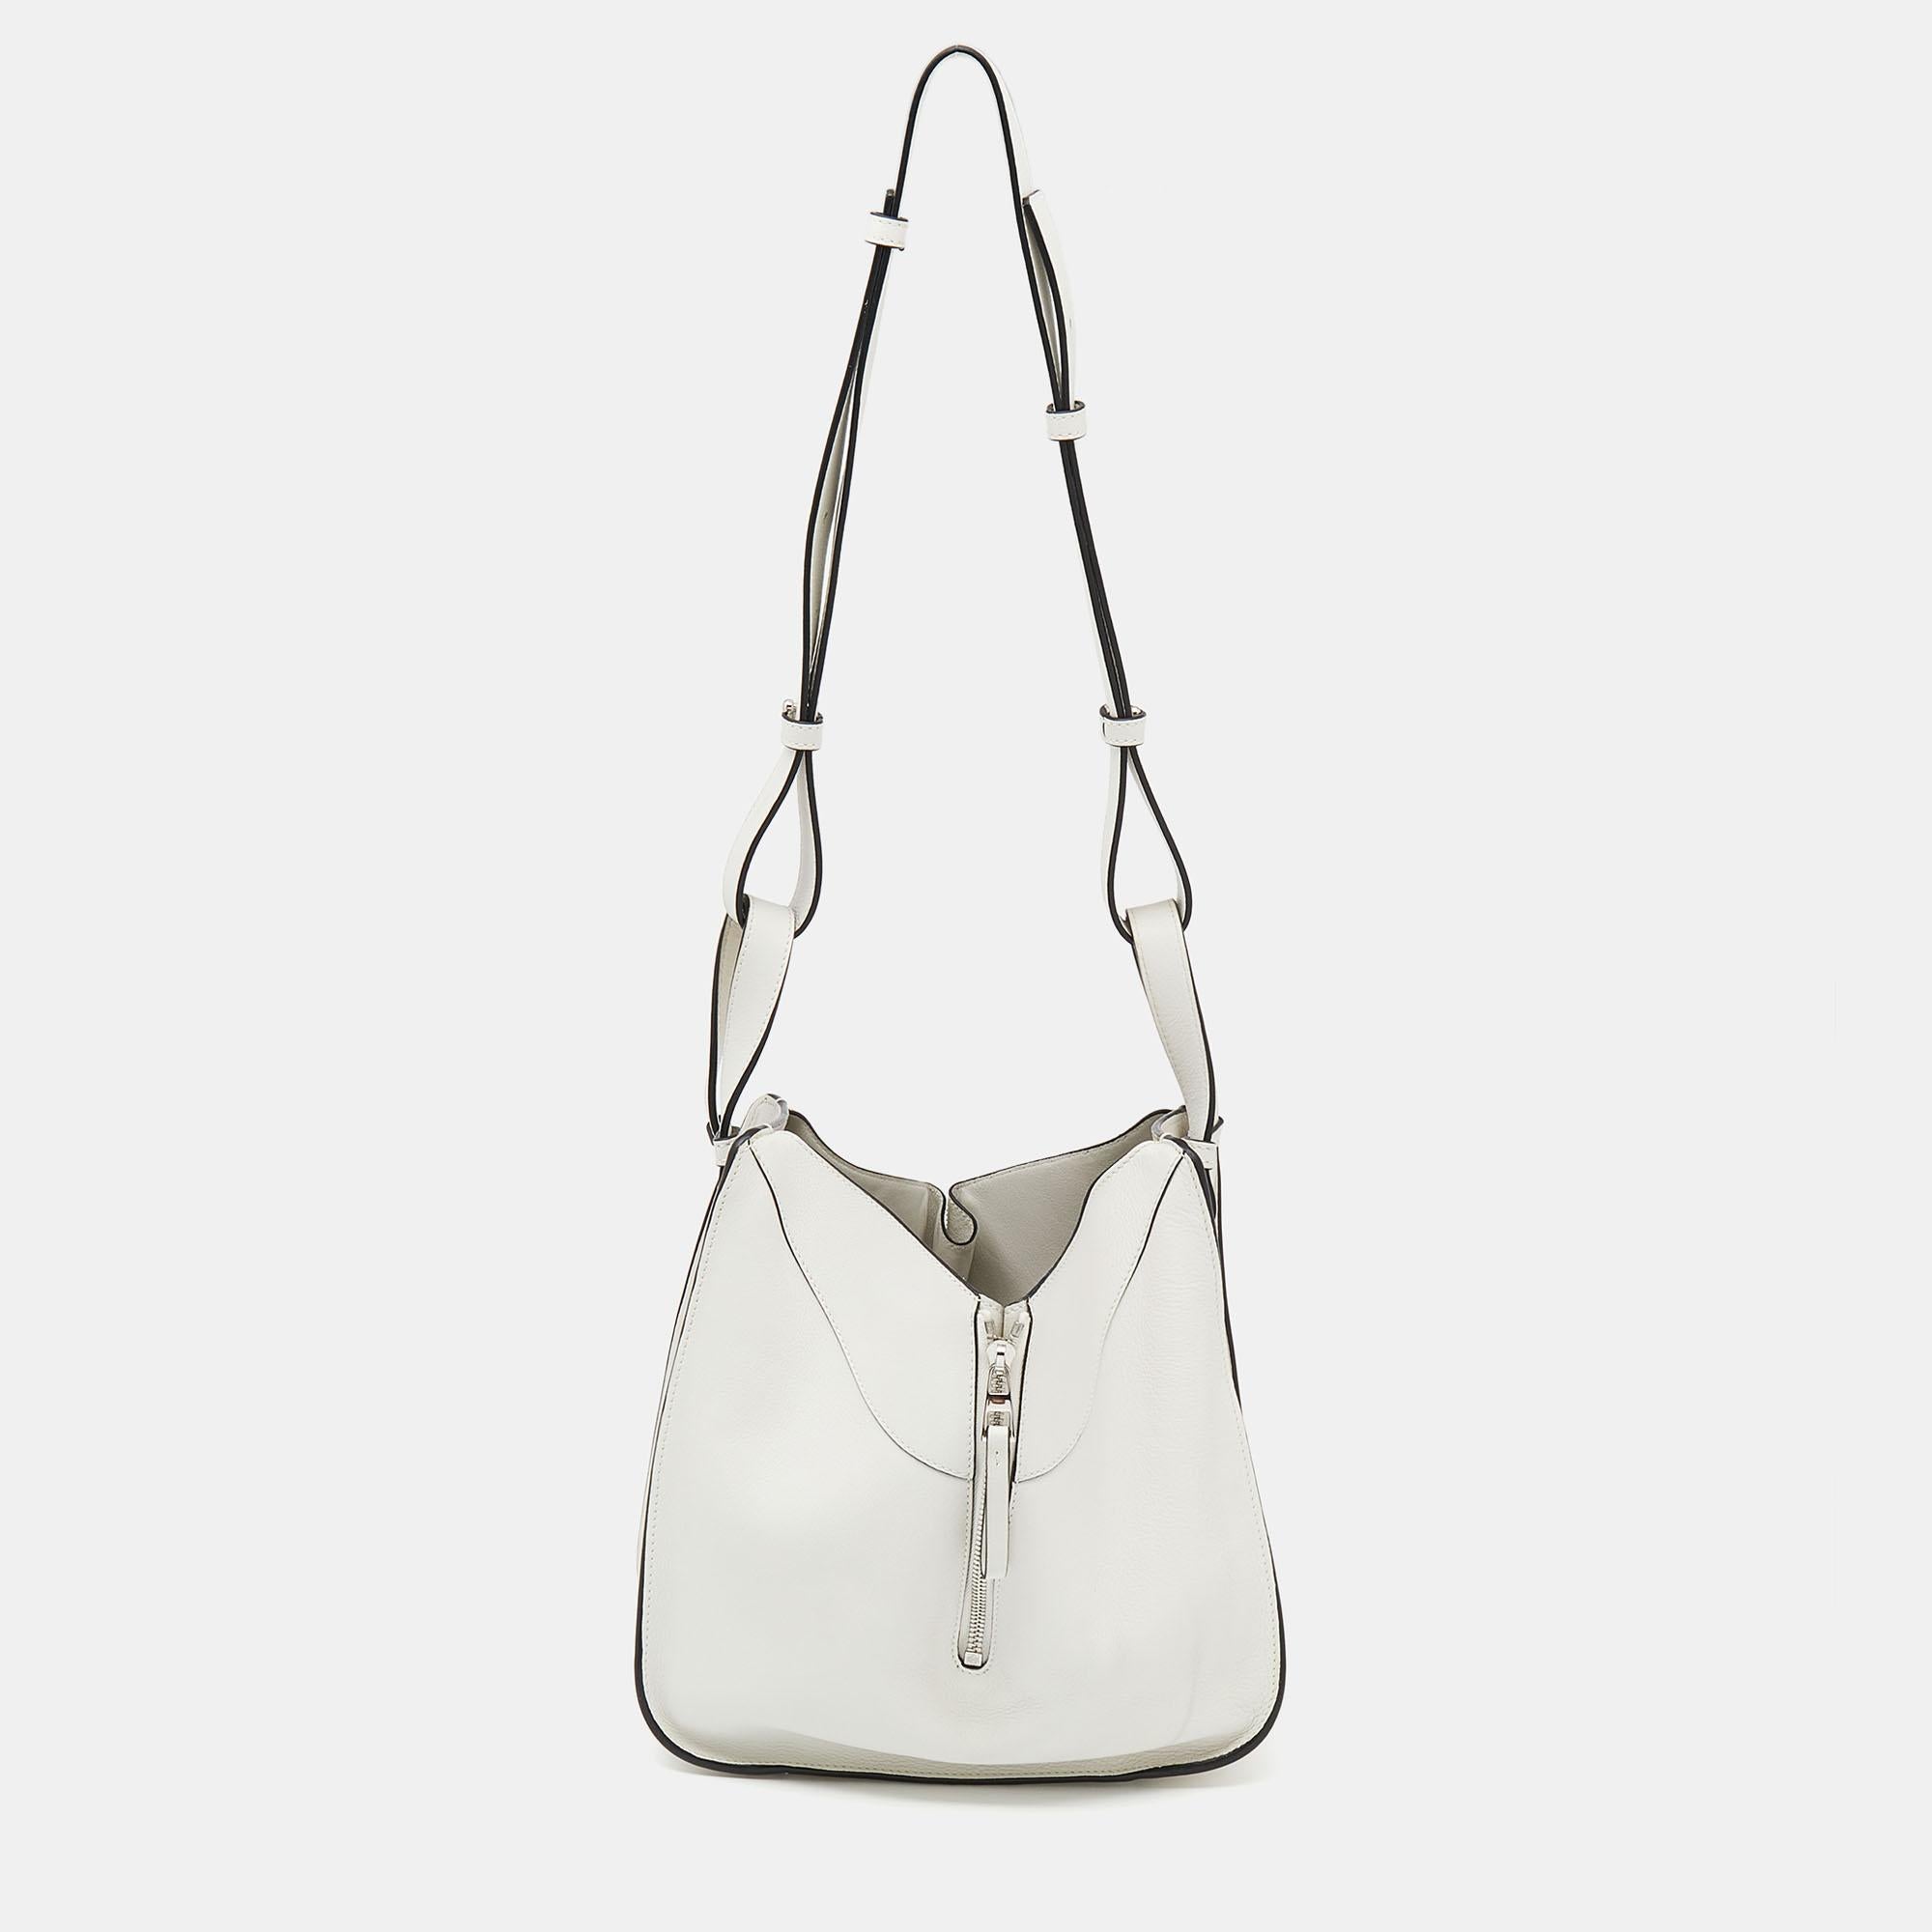 Loewe's high regard for unique designs and quality craftsmanship is exhibited in this small Hammock shoulder bag. Crafted using white leather, the shoulder bag has a highlighting zip detail along the middle, dual short handles with an attached